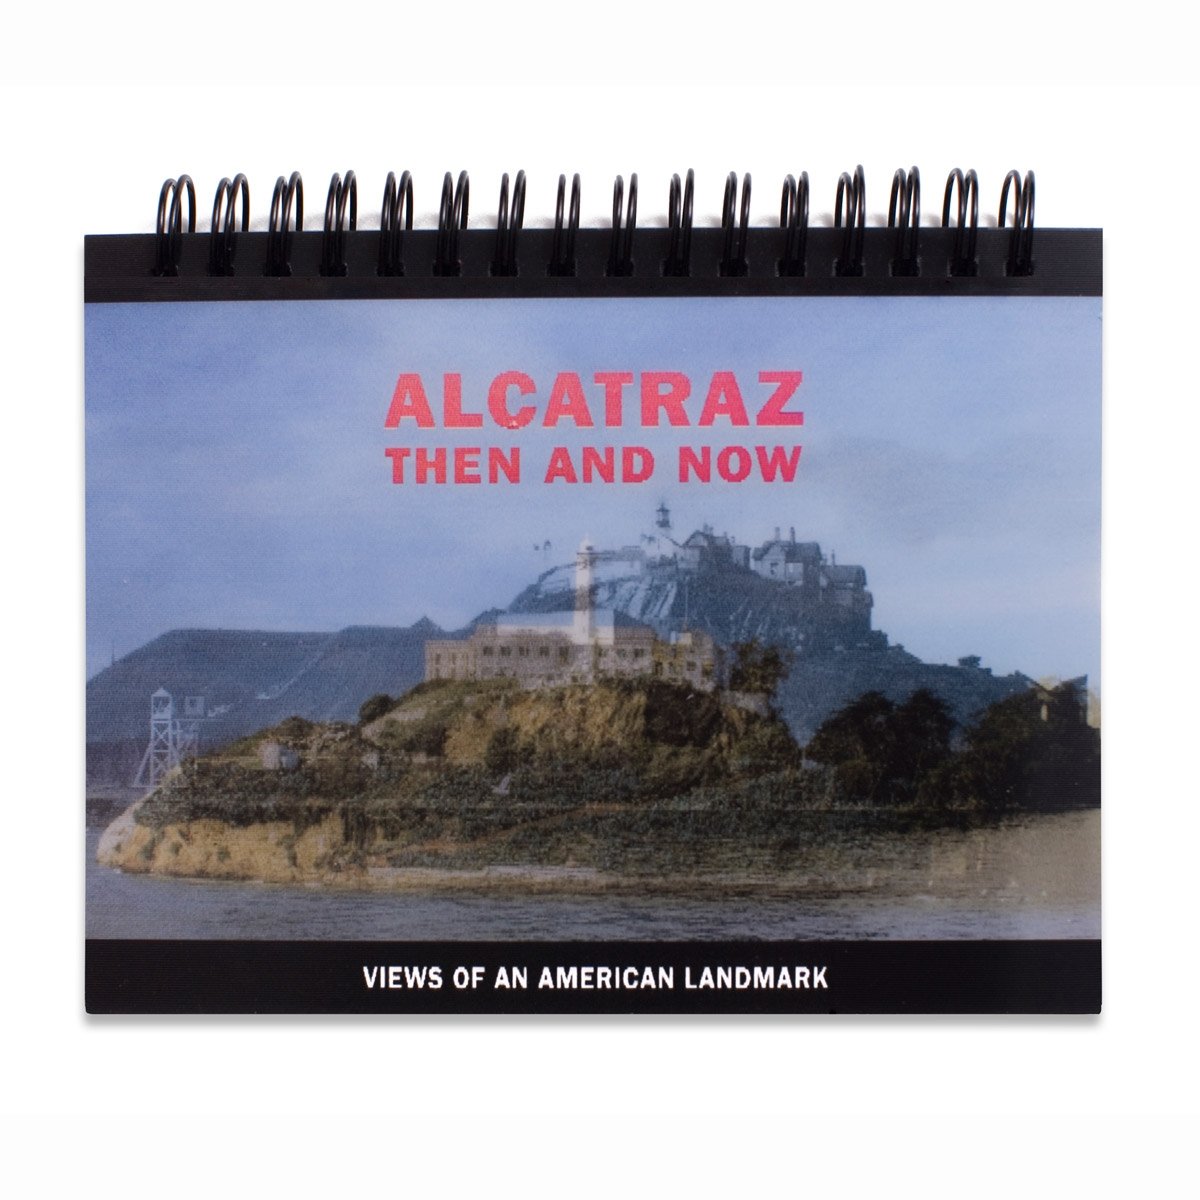 Alcatraz Then and Now lenticular book, featuring historical photographs of Alcatraz Island compared with modern day scenes.